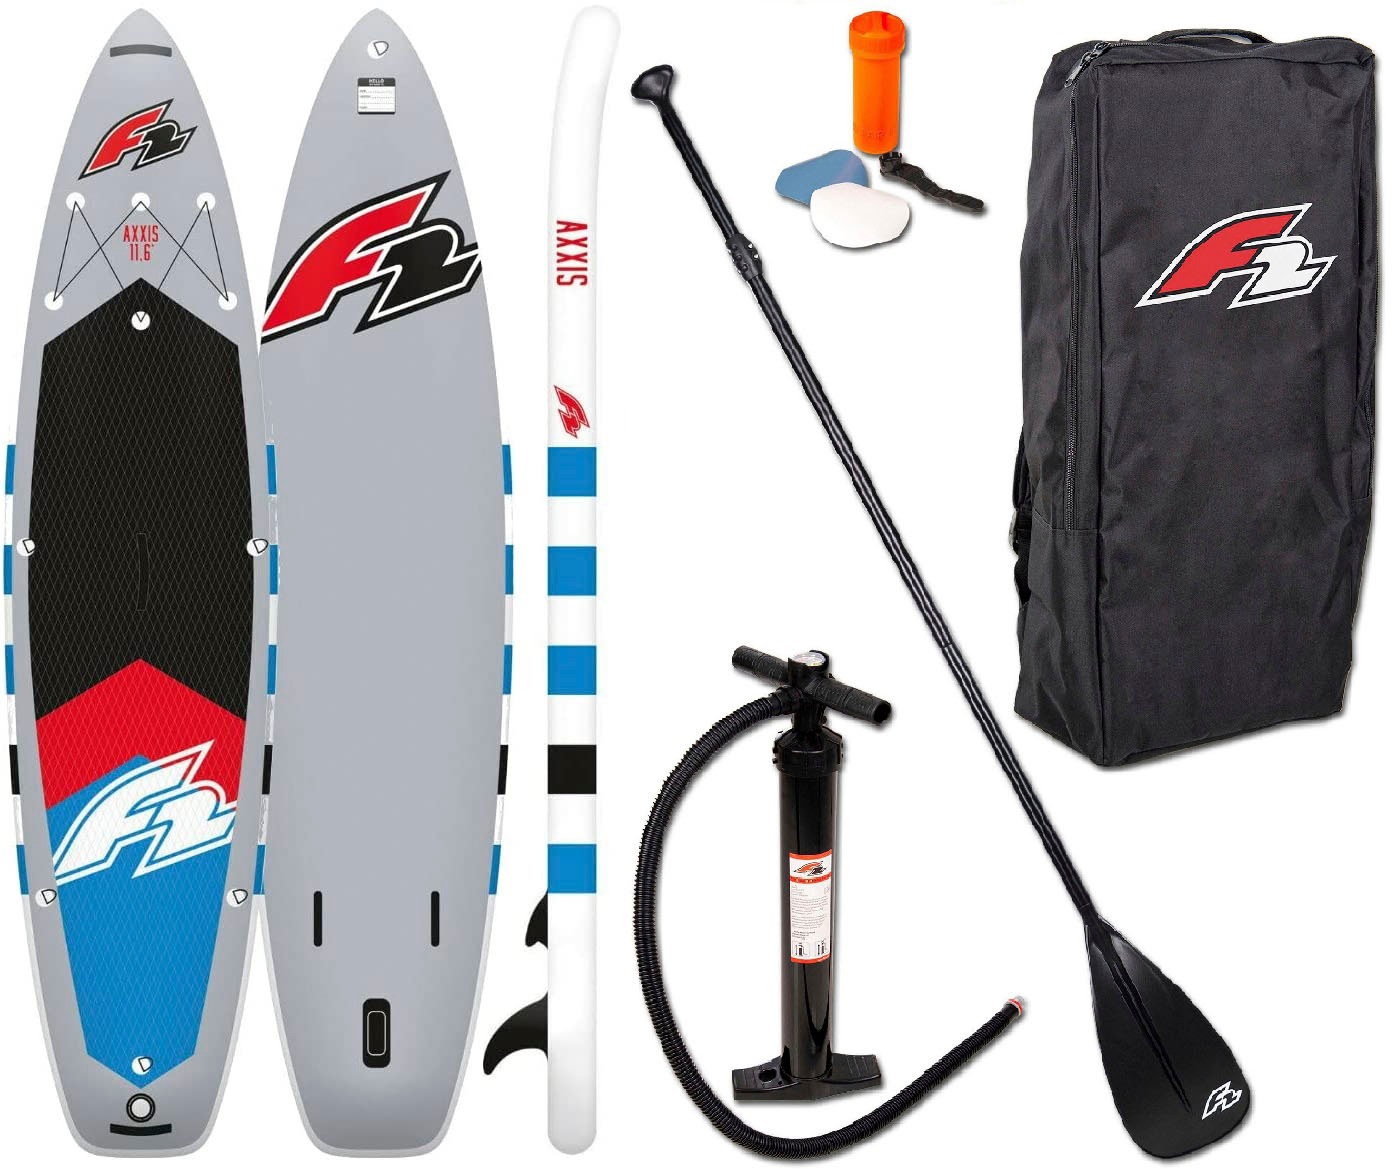 F2 Inflatable SUP-Board »Axxis OTTO 5 bei (Packung, grey«, kaufen tlg.) 11,6